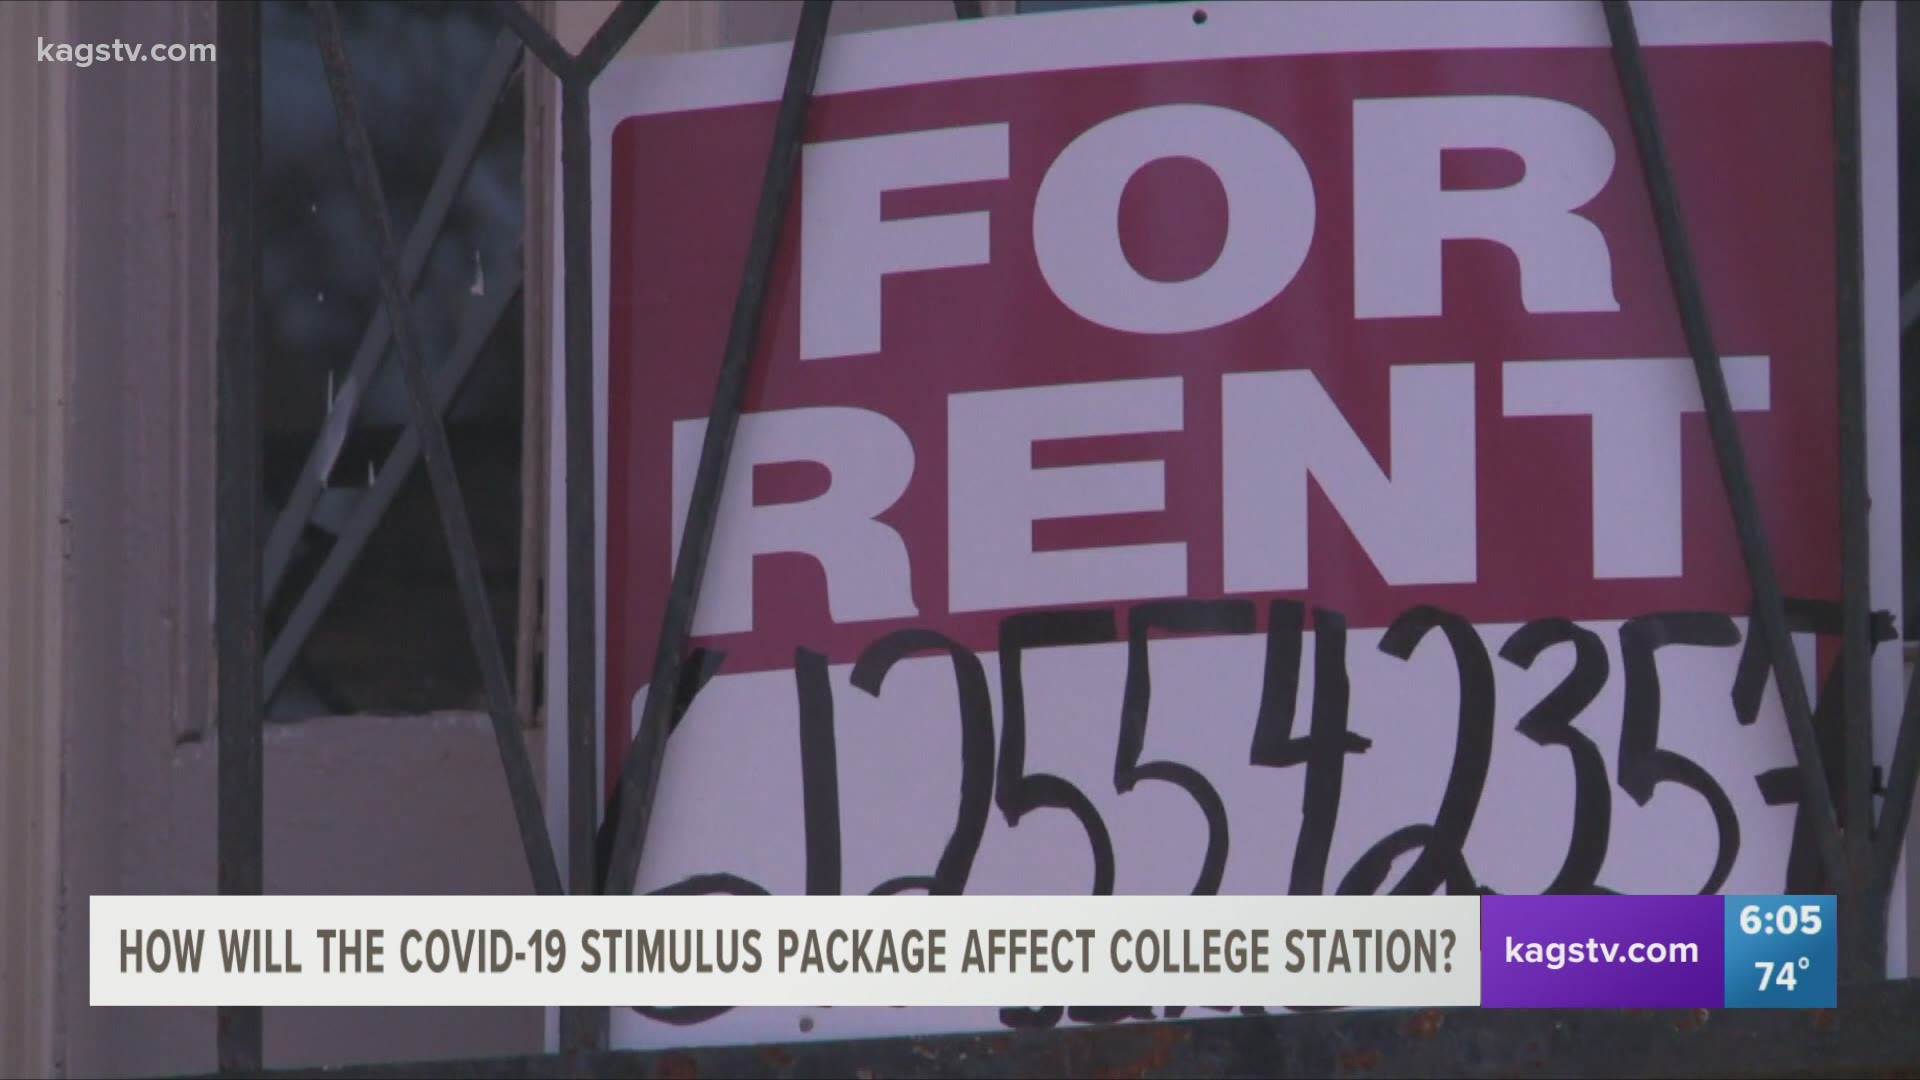 This package not only extends the eviction moratorium, but it also provides $25 billion dollars in rental assistance.